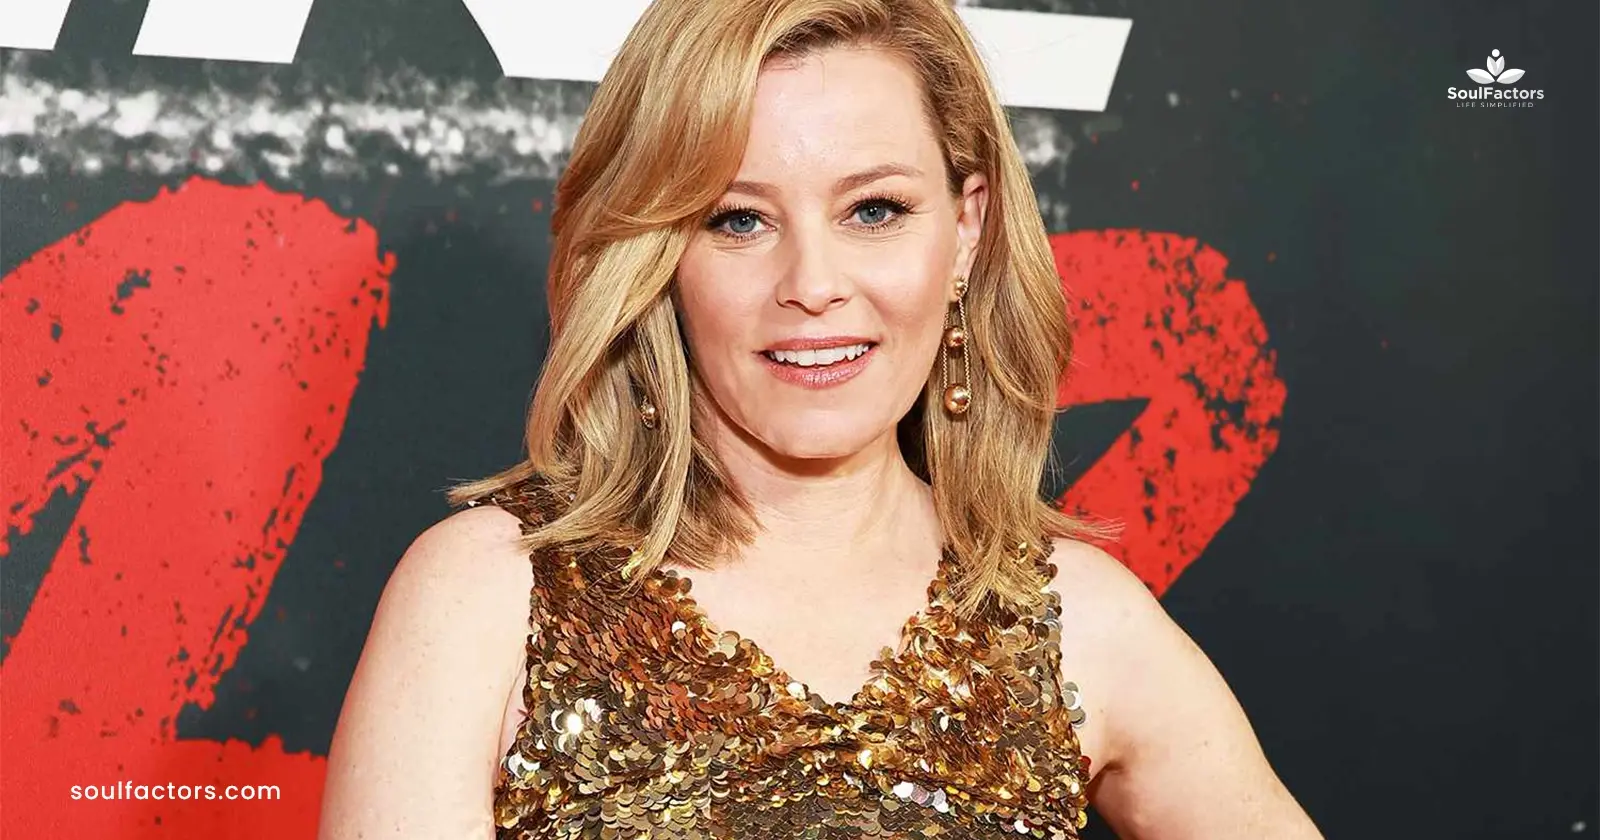 Elizabeth Banks Has Stated She Will Never Try Injectables